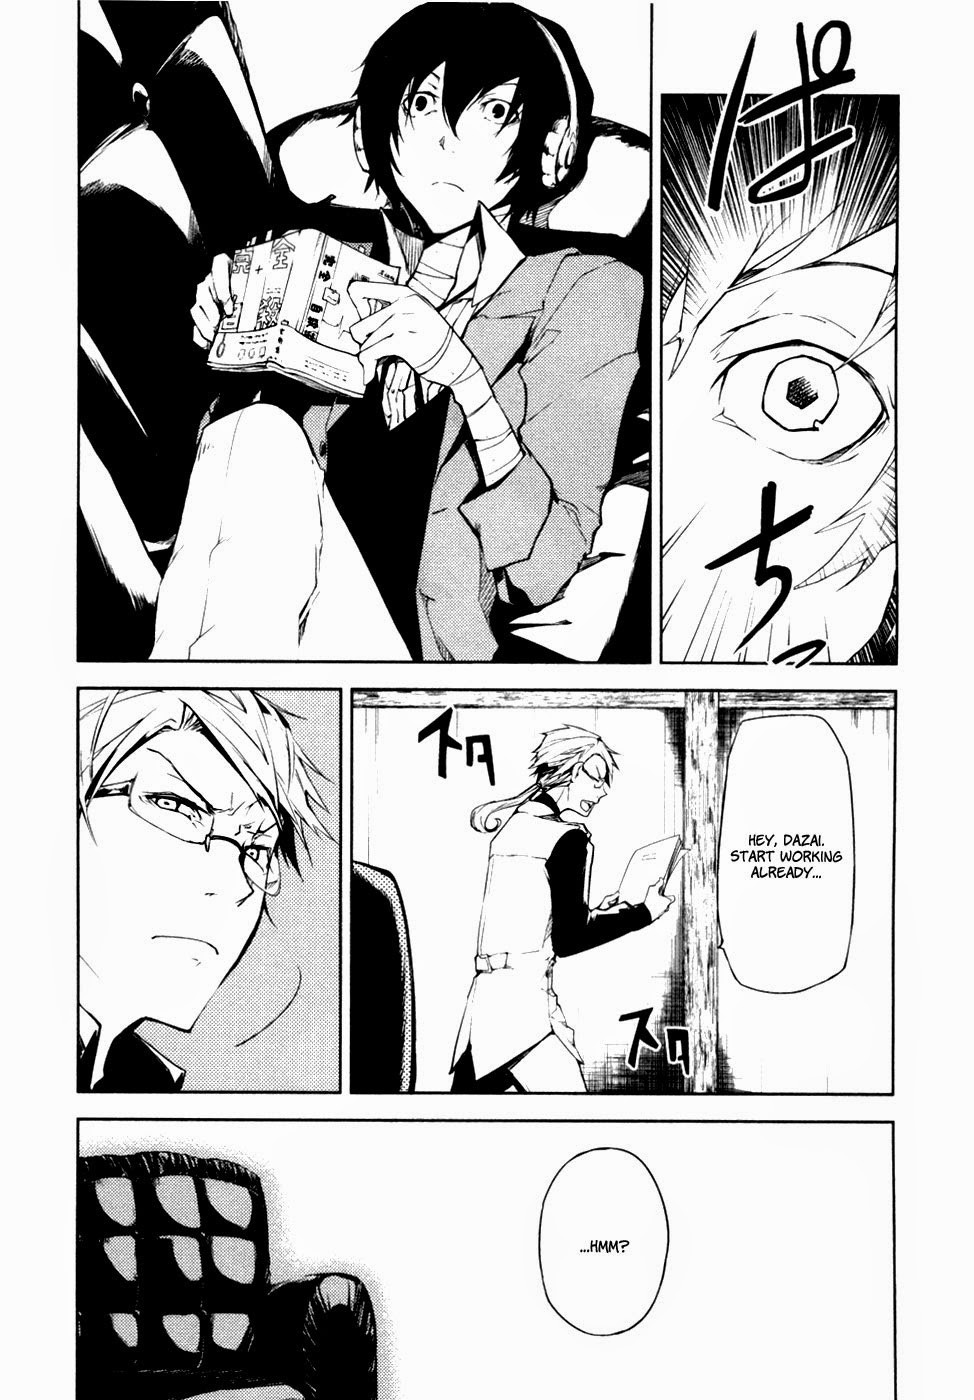 Bungo Stray Dogs chapter 4 page 1